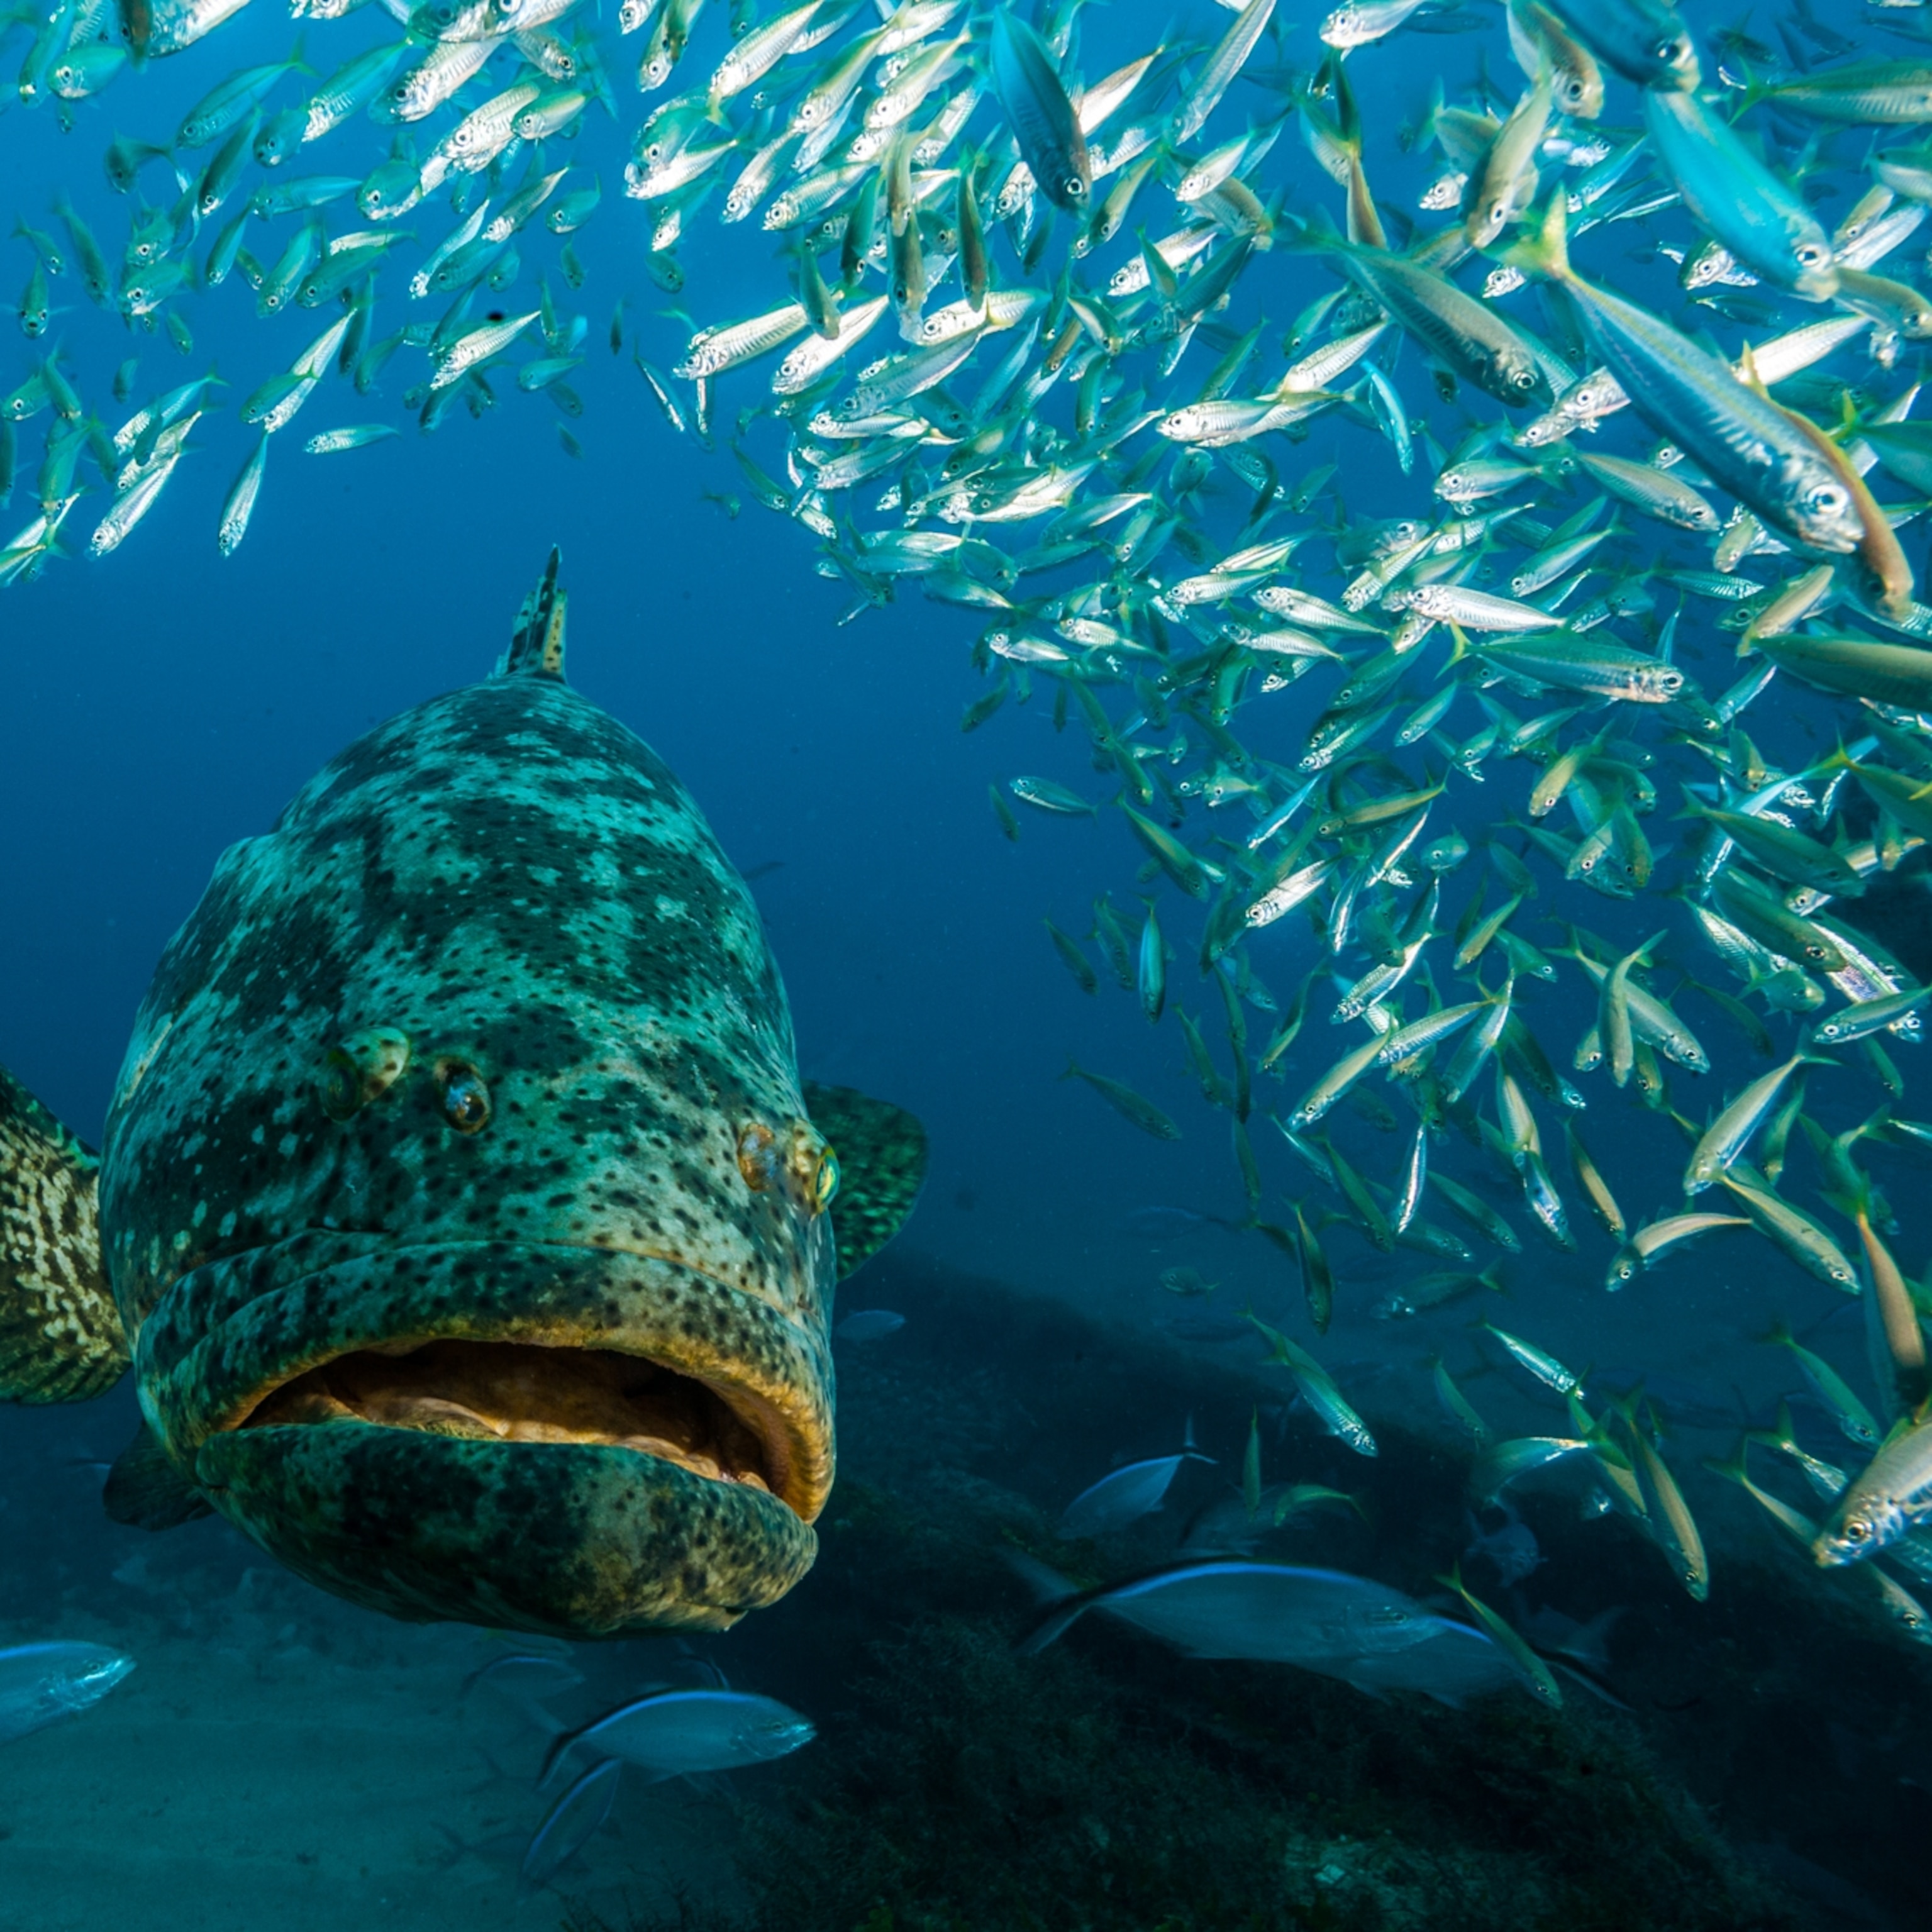 Goliath Grouper Fishing May Be Allowed In Florida Again After 30 Year Ban